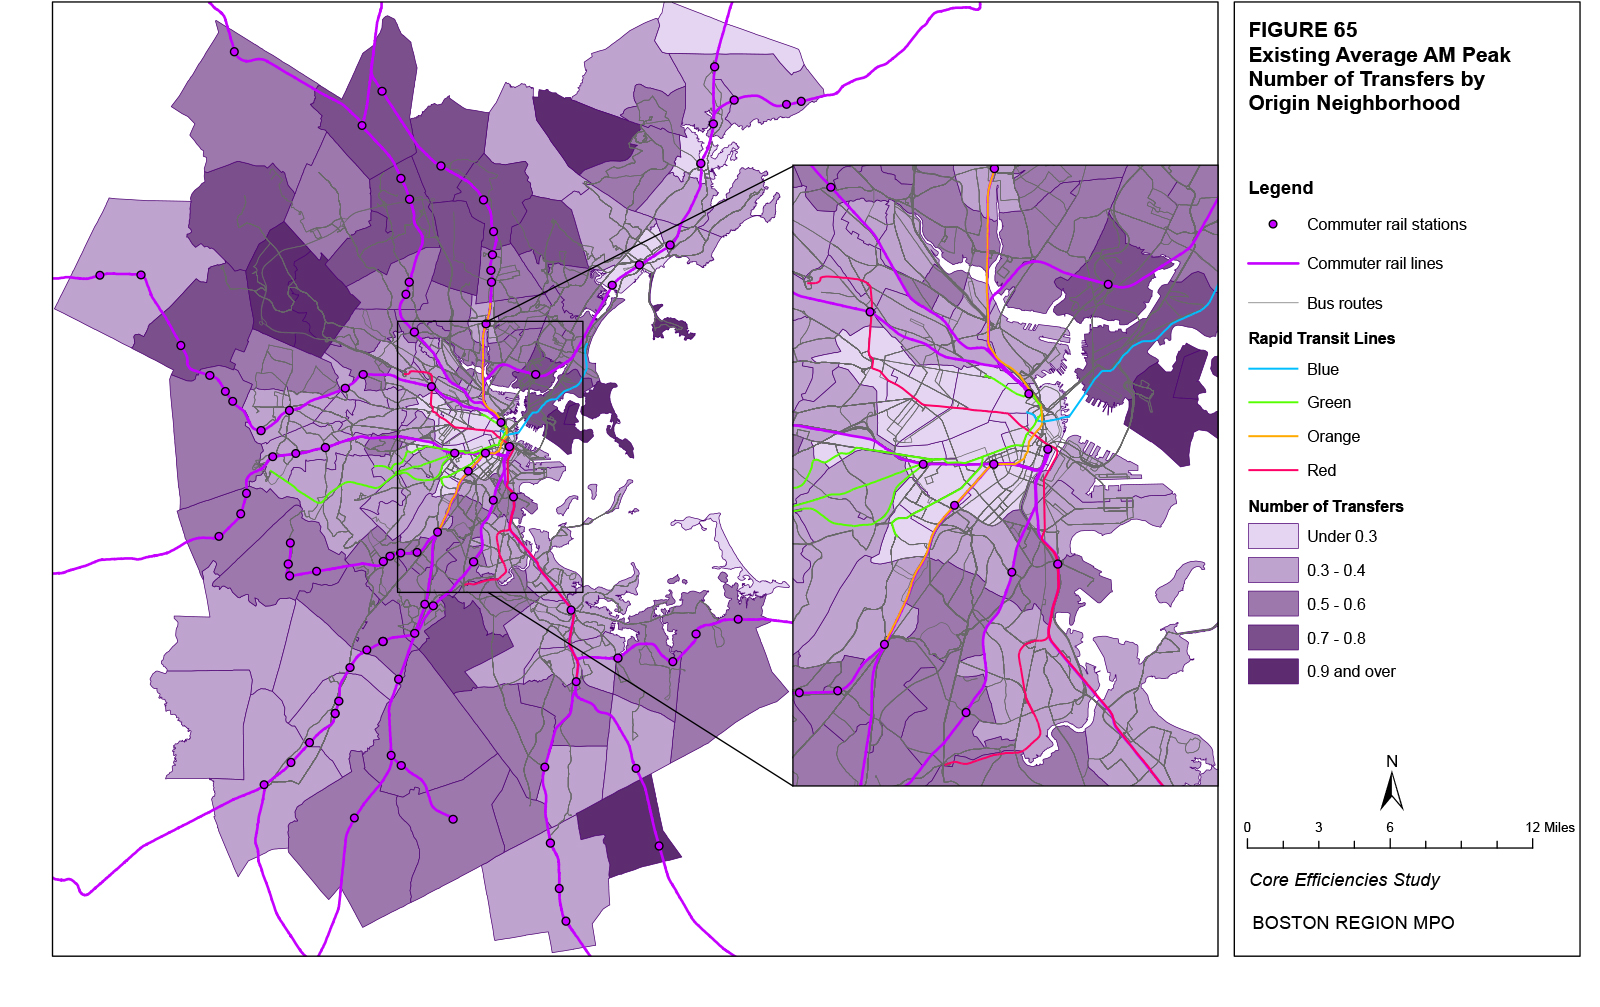 This map shows the existing average AM peak number of transfers for origin trips by neighborhood.